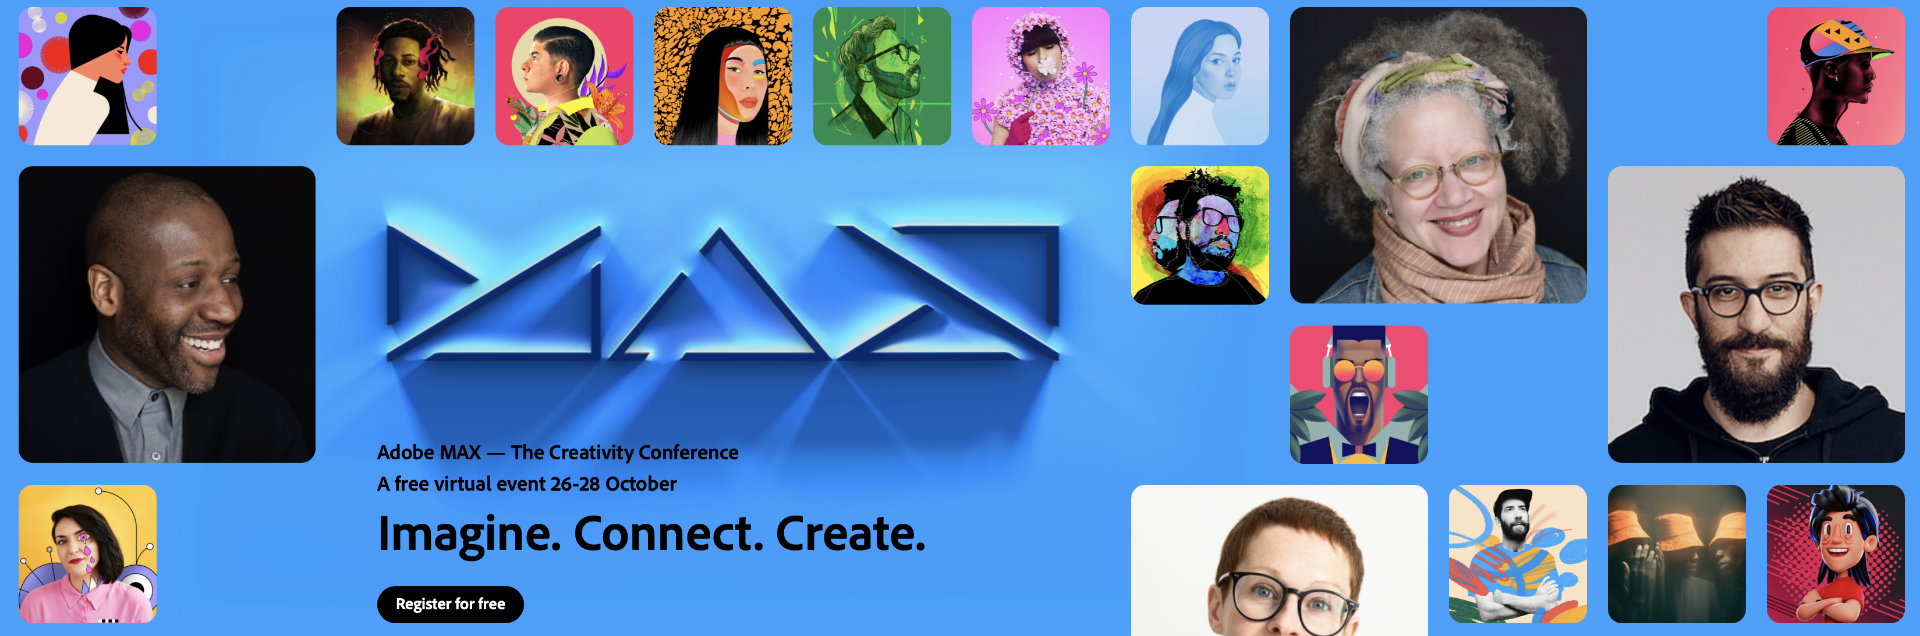 Adobe MAX Conference Get Free Access to All Online Sessions CineD